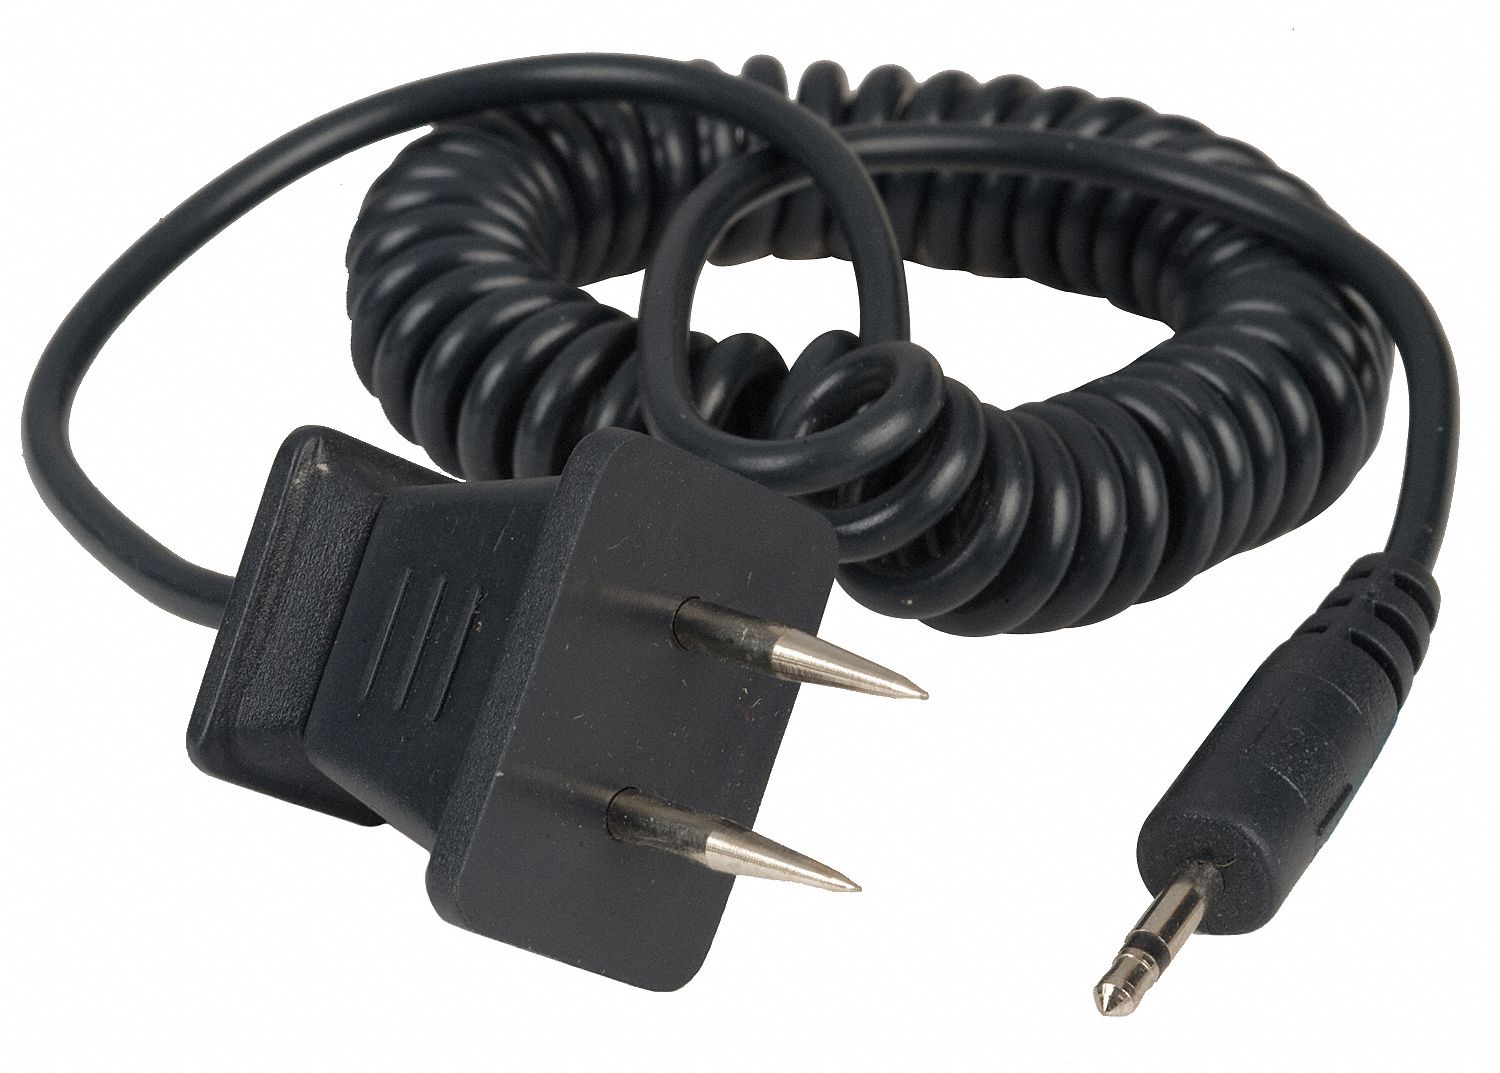 Replacement Cord: For Mfr. No. 50211, 1 yr Limited